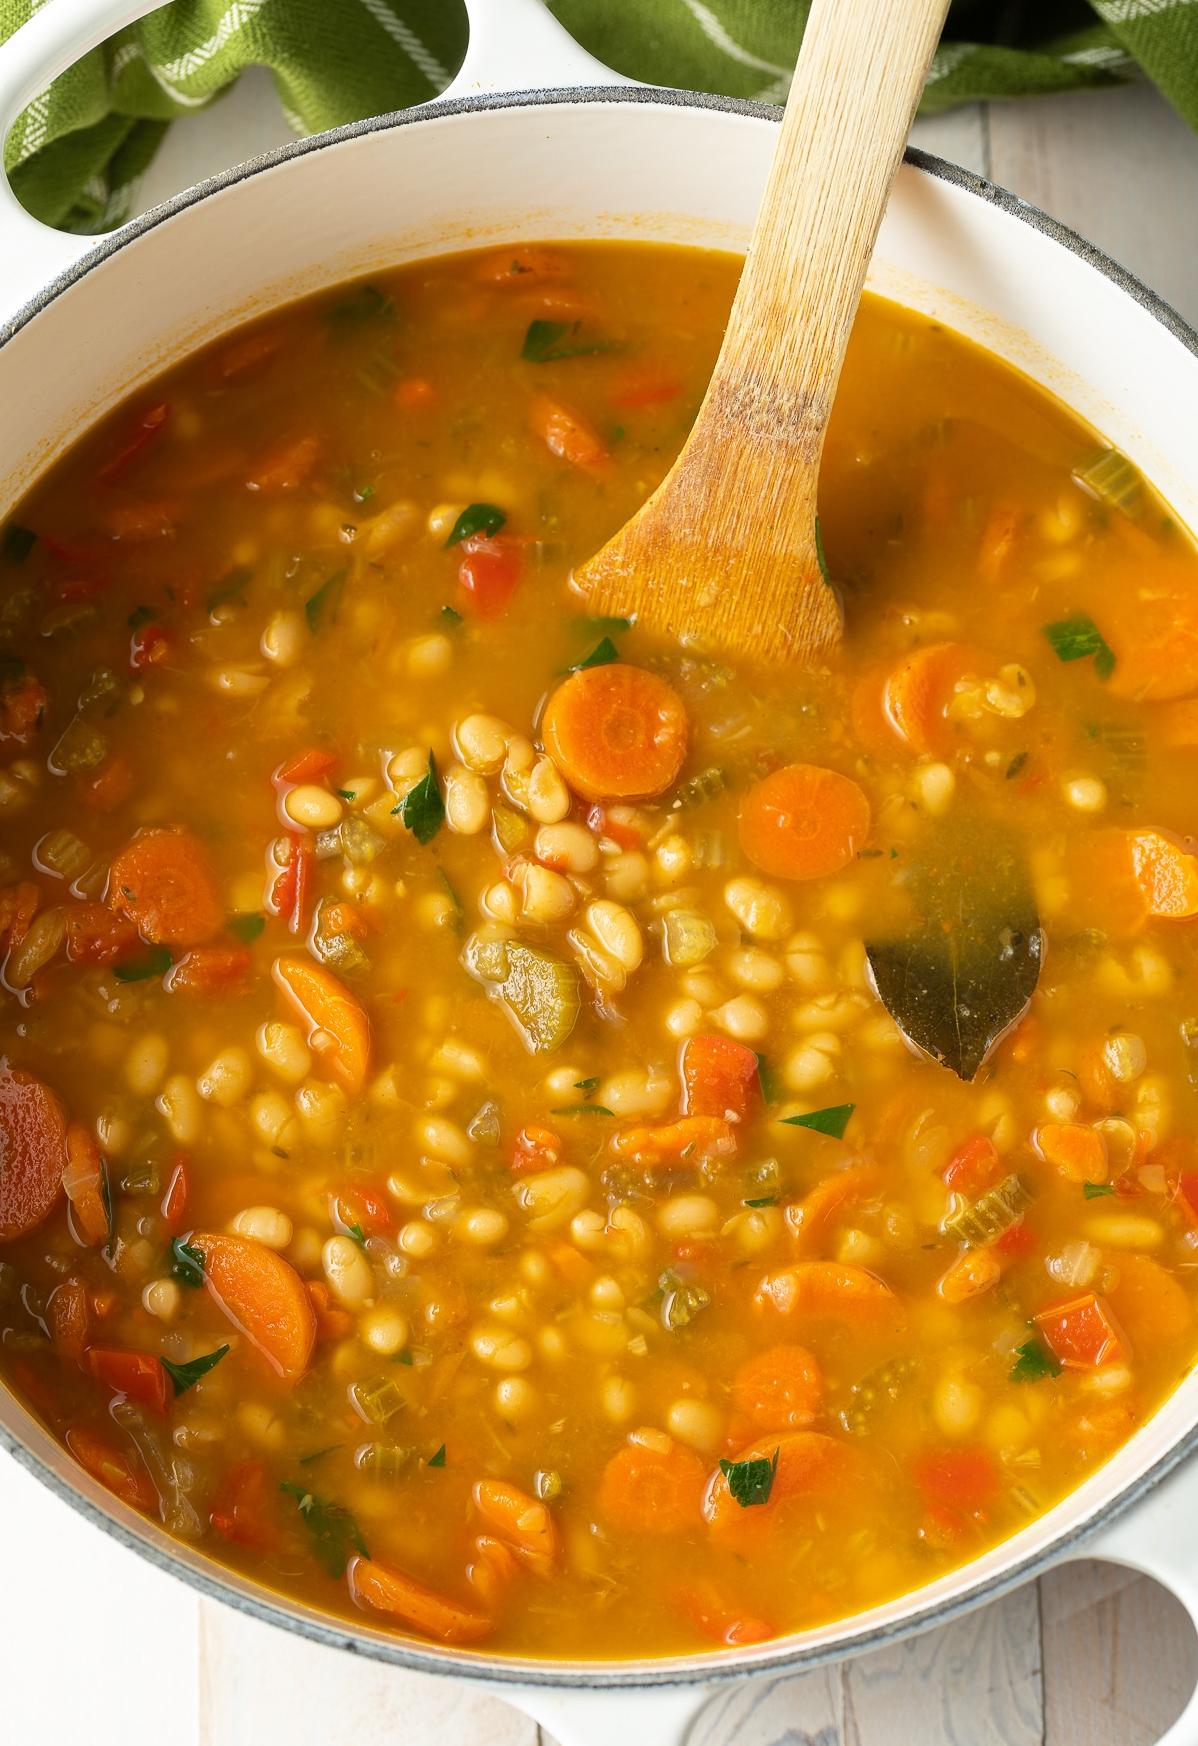  Vegan Navy Bean Soup: full of nutrients, flavor, and love.